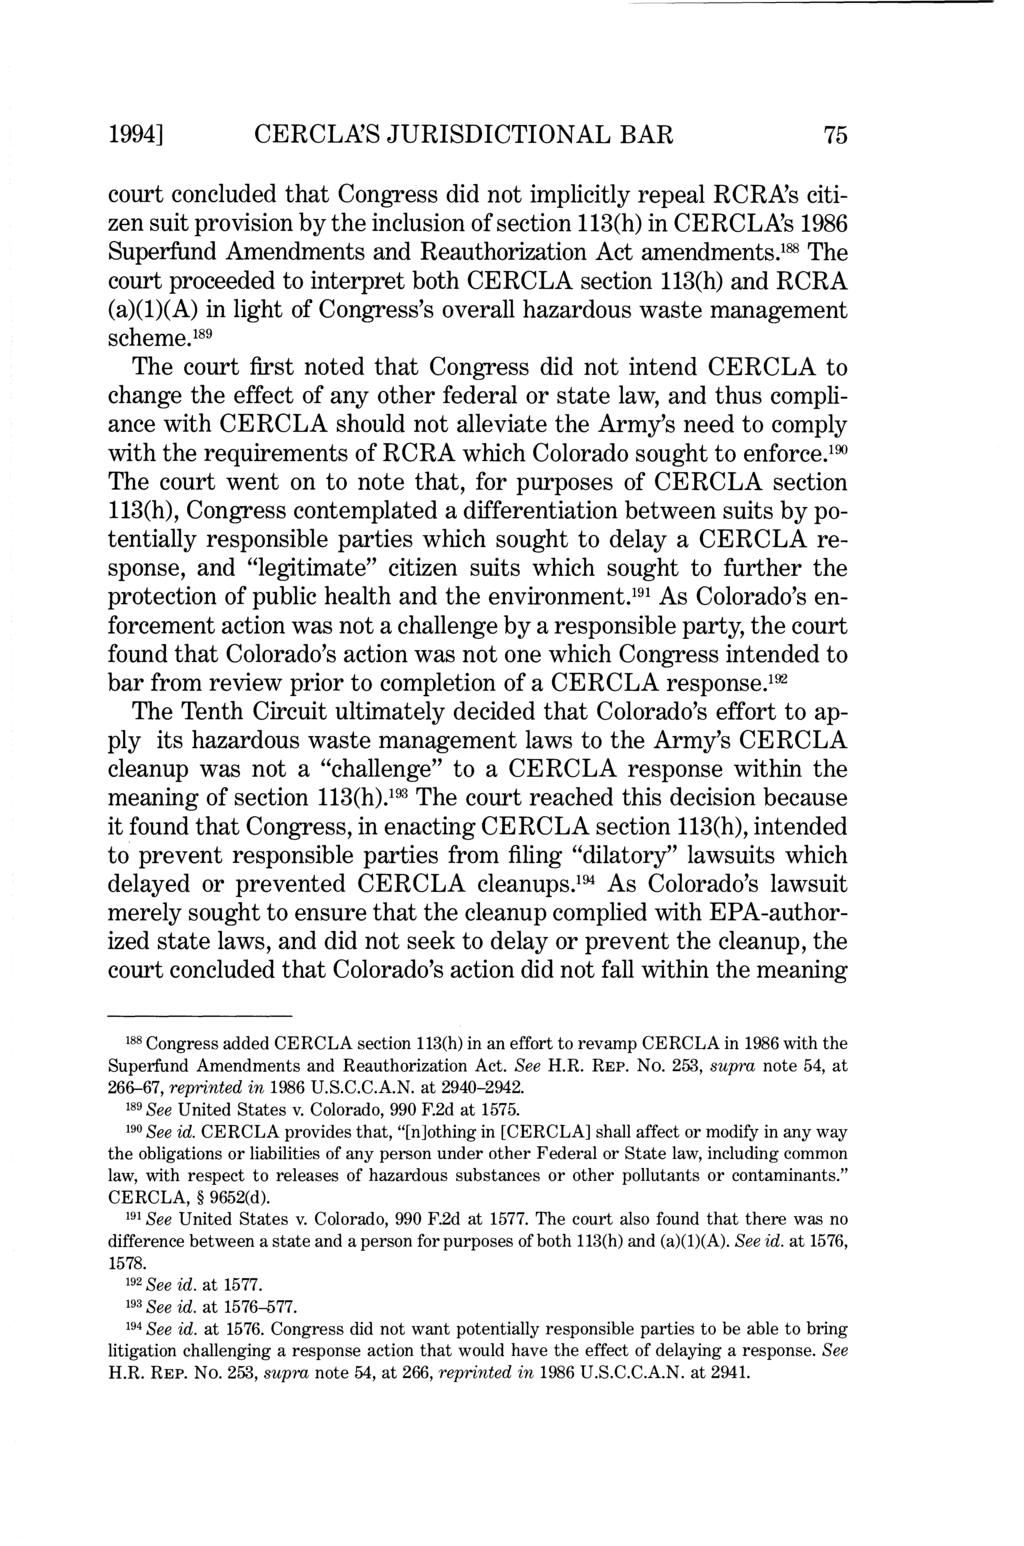 1994] CERCLXS JURISDICTIONAL BAR 75 court concluded that Congress did not implicitly repeal RCRXs citizen suit provision by the inclusion of section 113(h) in CERCLXs 1986 Superfund Amendments and